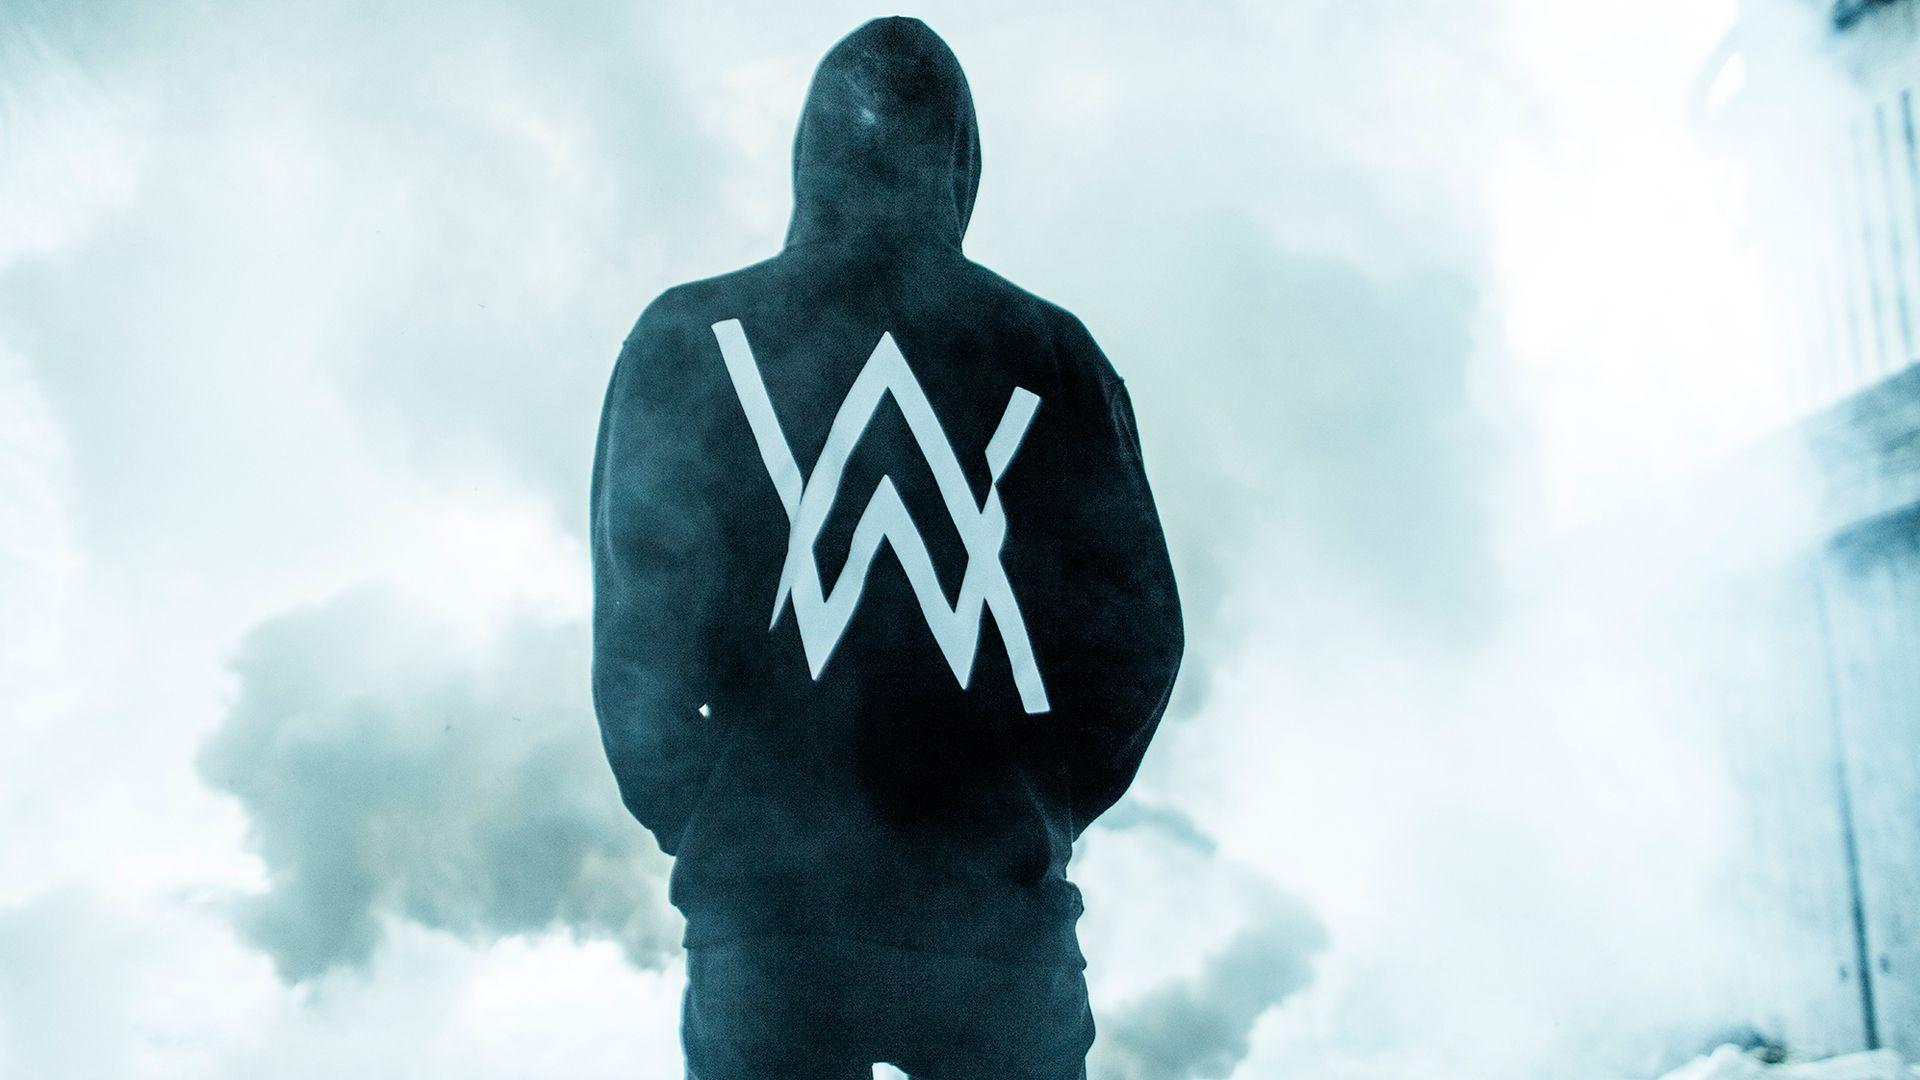 Alan Walker Image HD Wallpaper And Background Photos